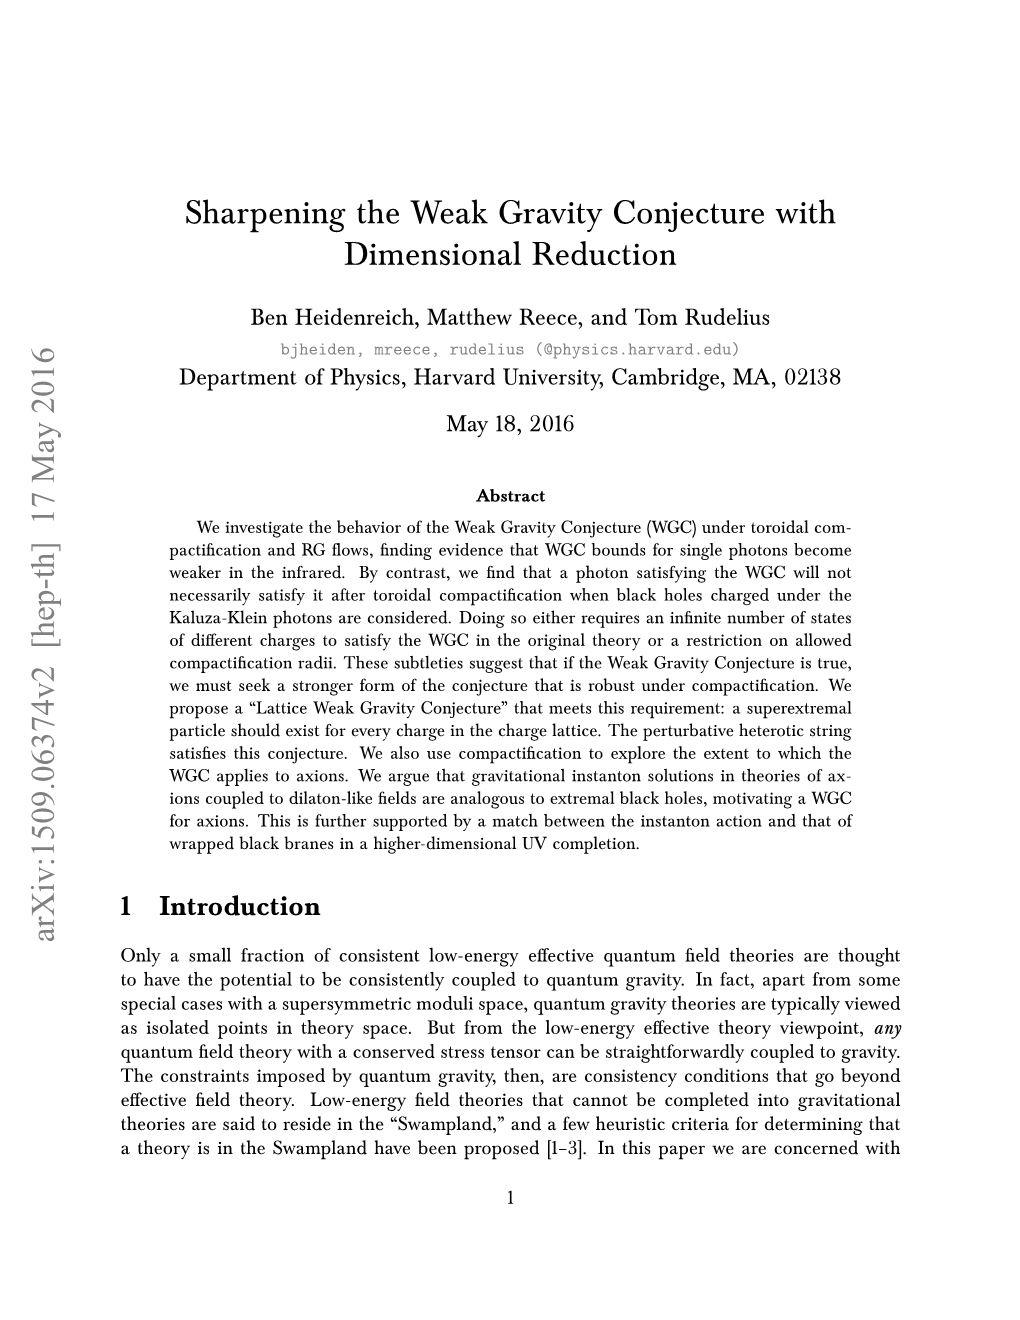 Sharpening the Weak Gravity Conjecture with Dimensional Reduction Arxiv:1509.06374V2 [Hep-Th] 17 May 2016